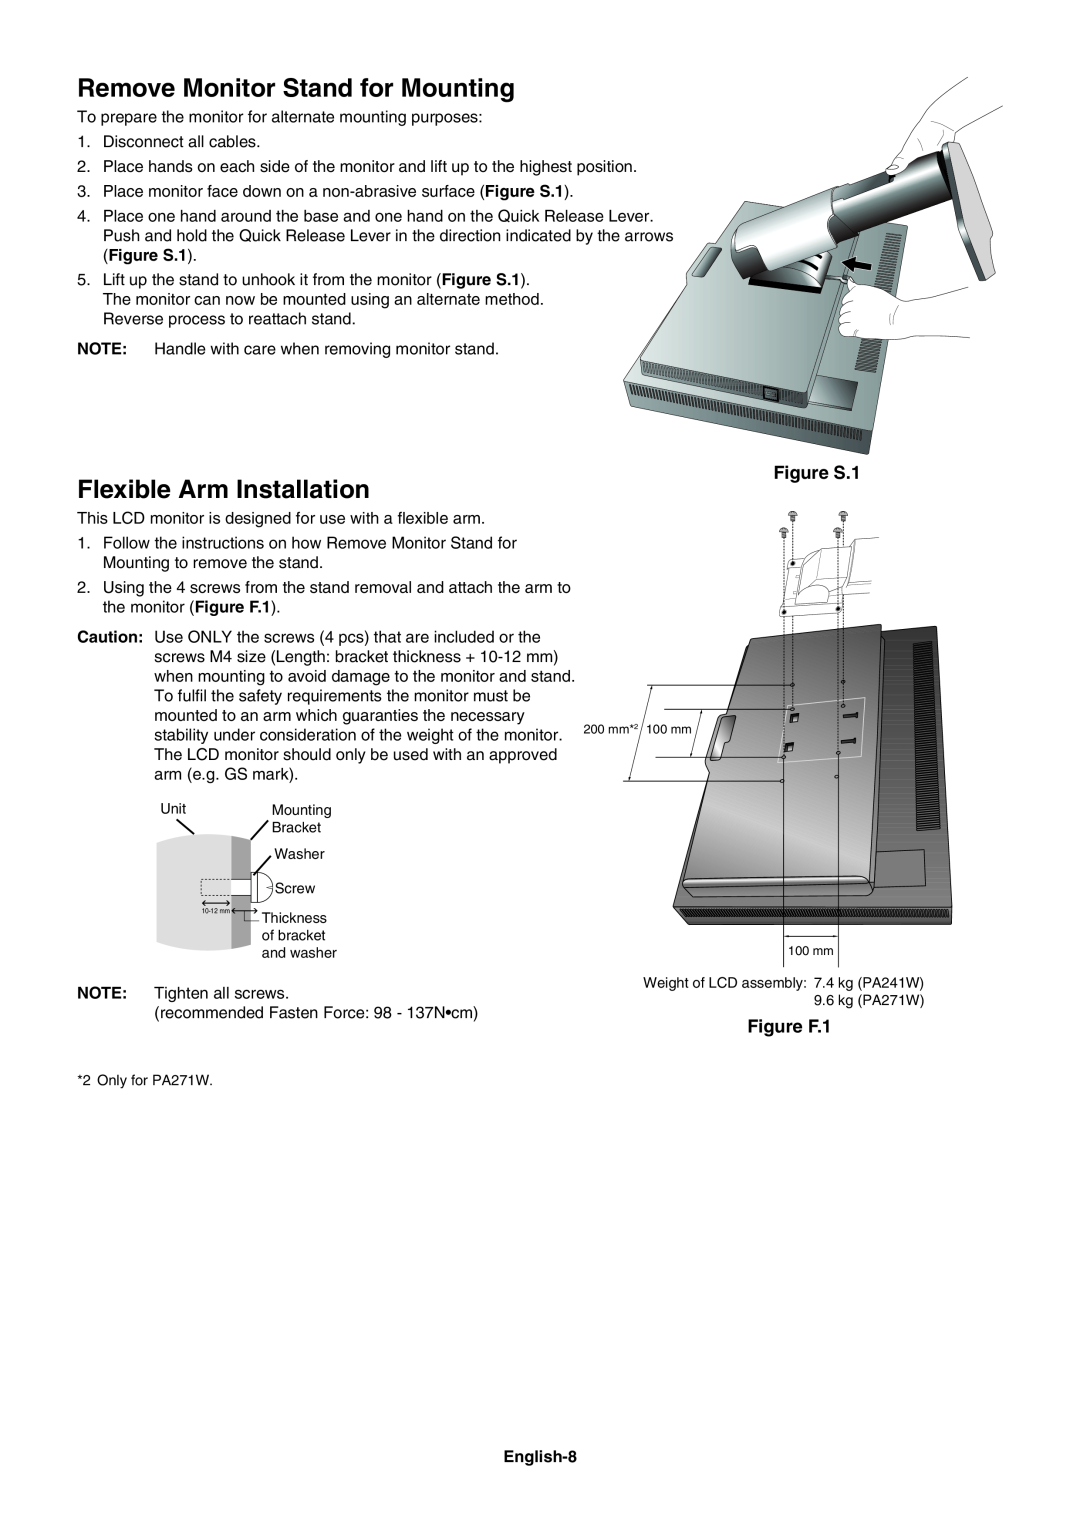 NEC PA271W user manual Remove Monitor Stand for Mounting, Flexible Arm Installation, Figure S.1, Figure F.1 